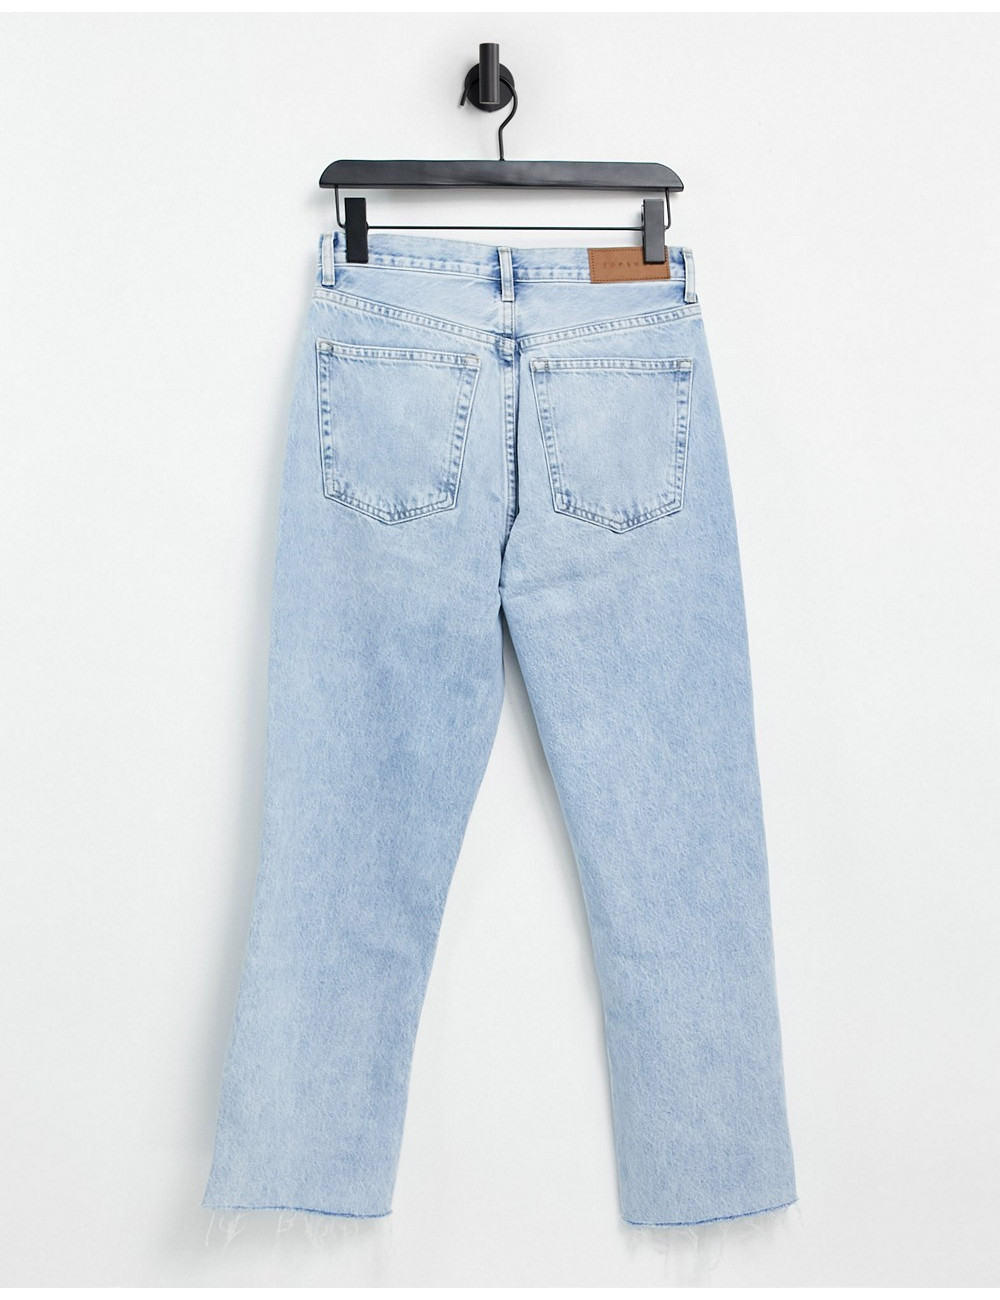 Topshop editor jeans in bleach